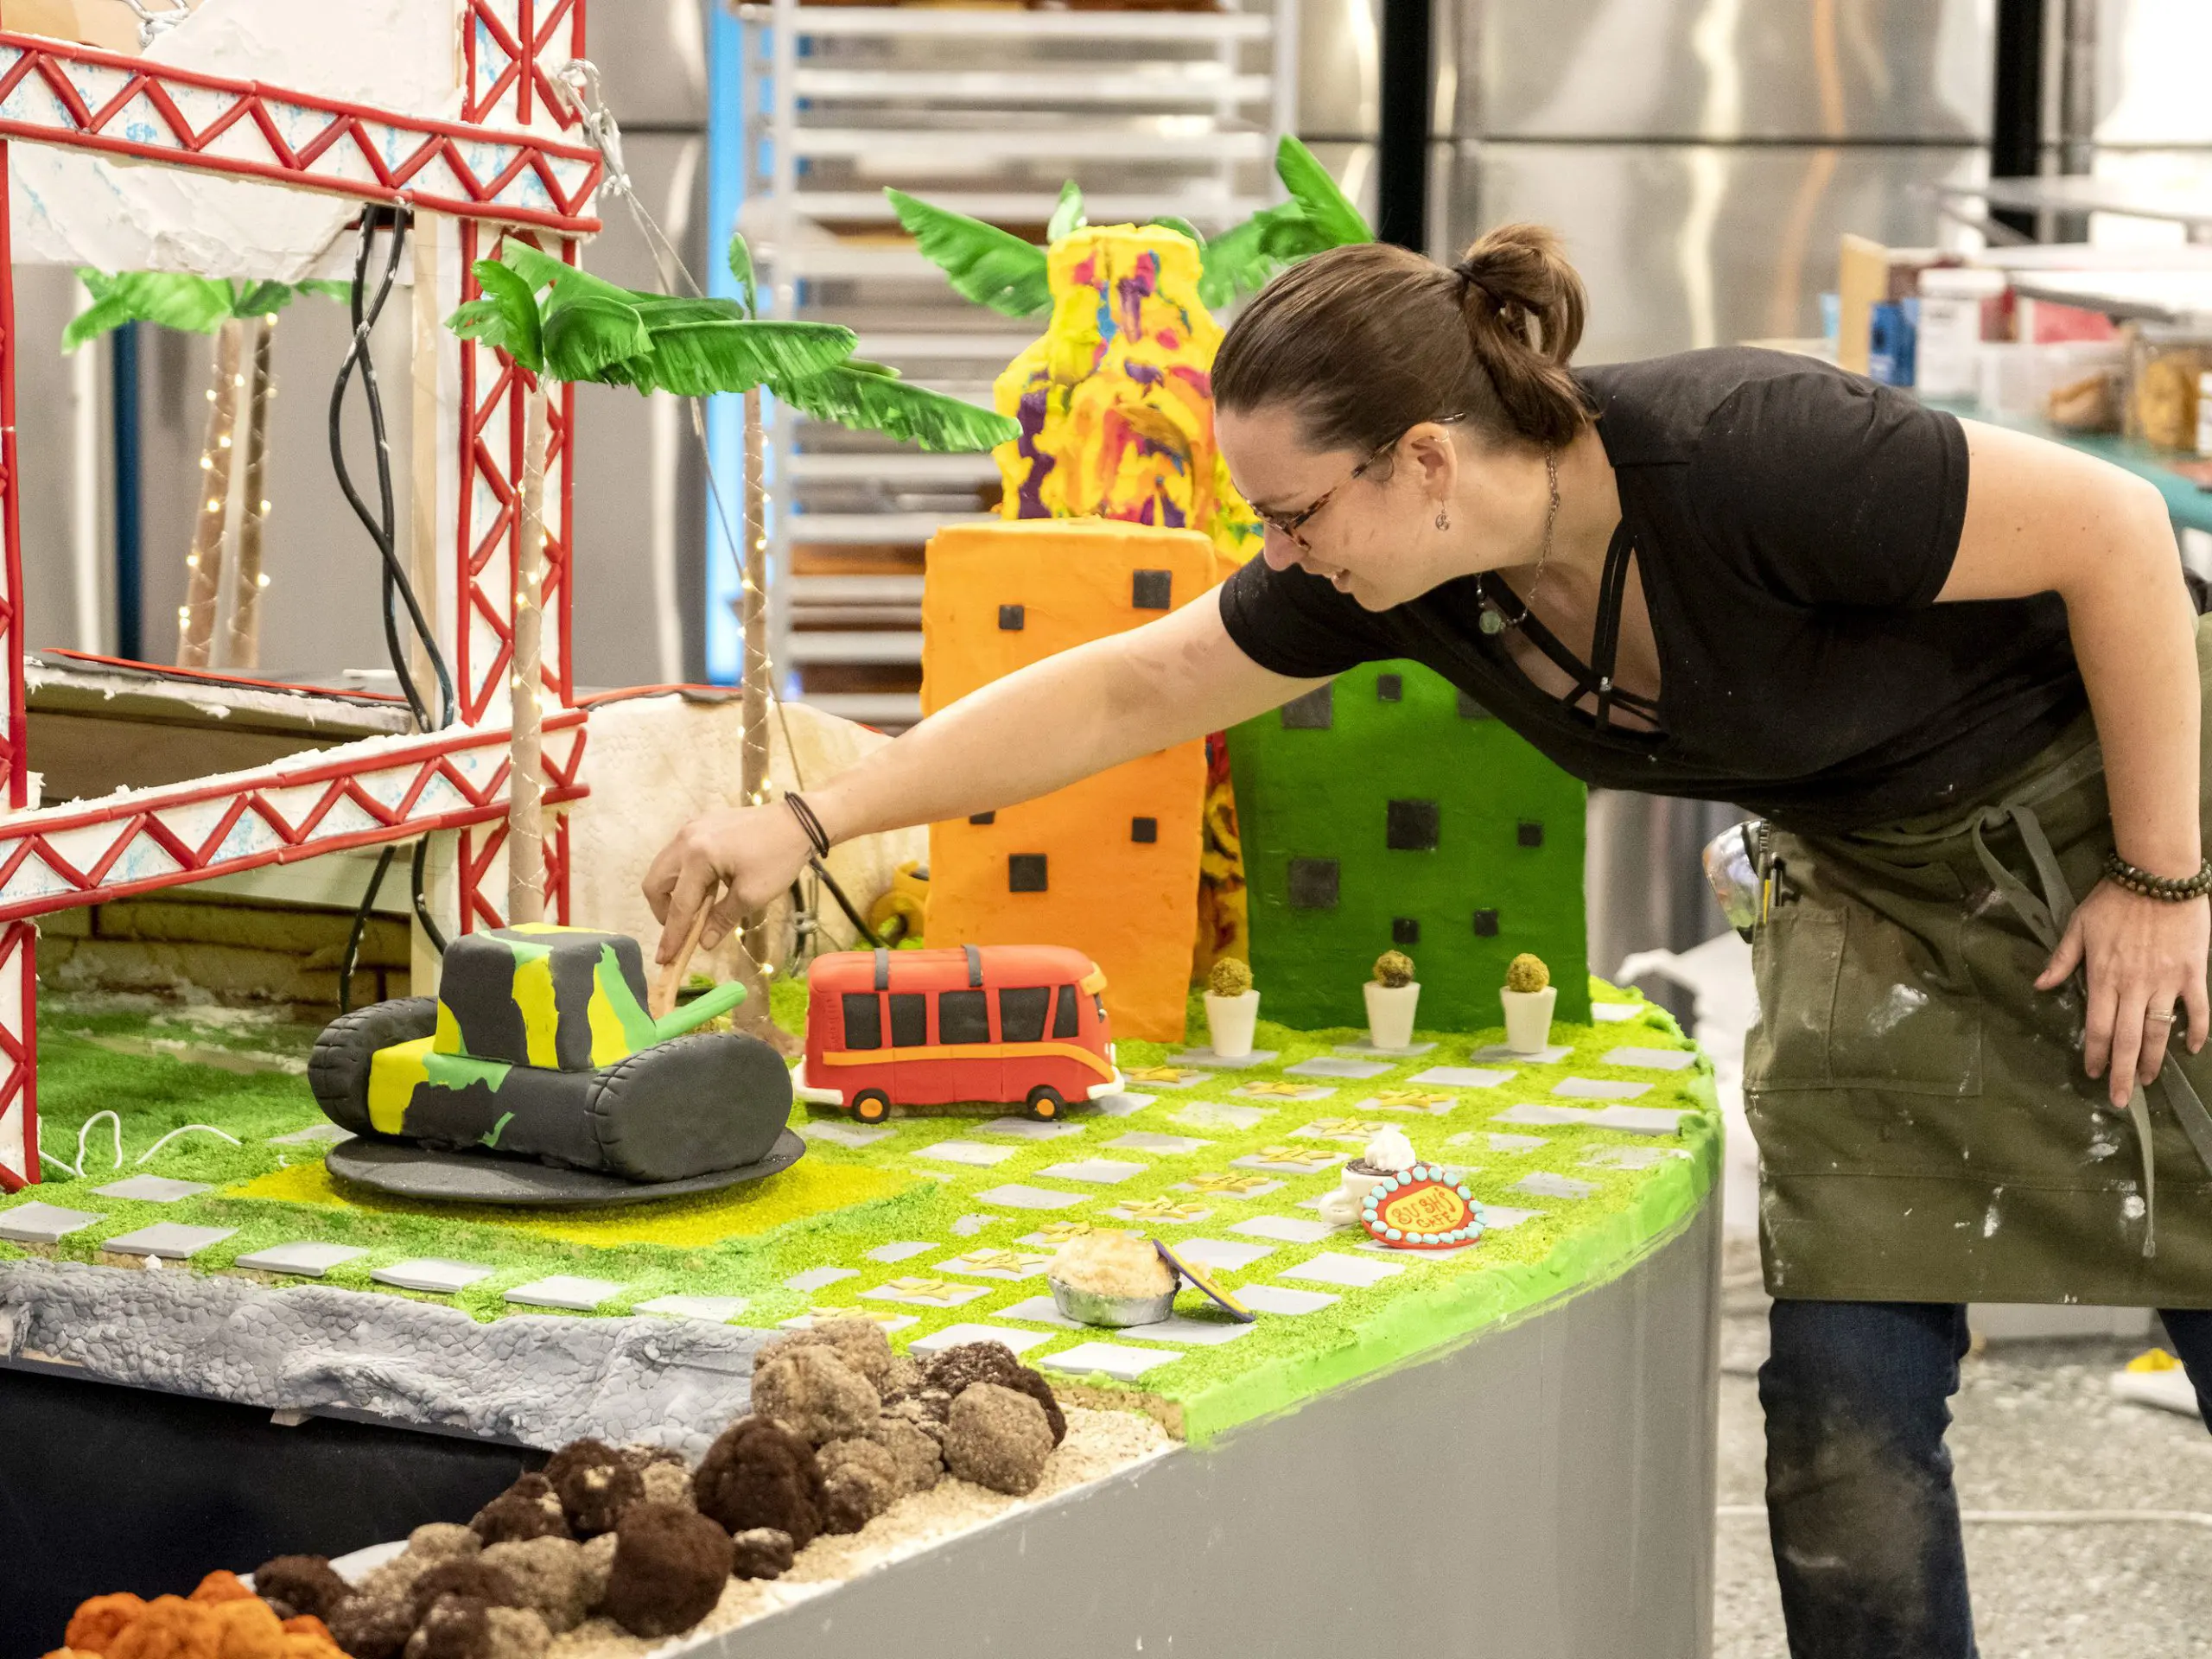 Netflix’s Baking Impossible winner discusses behind-the-scenes reality